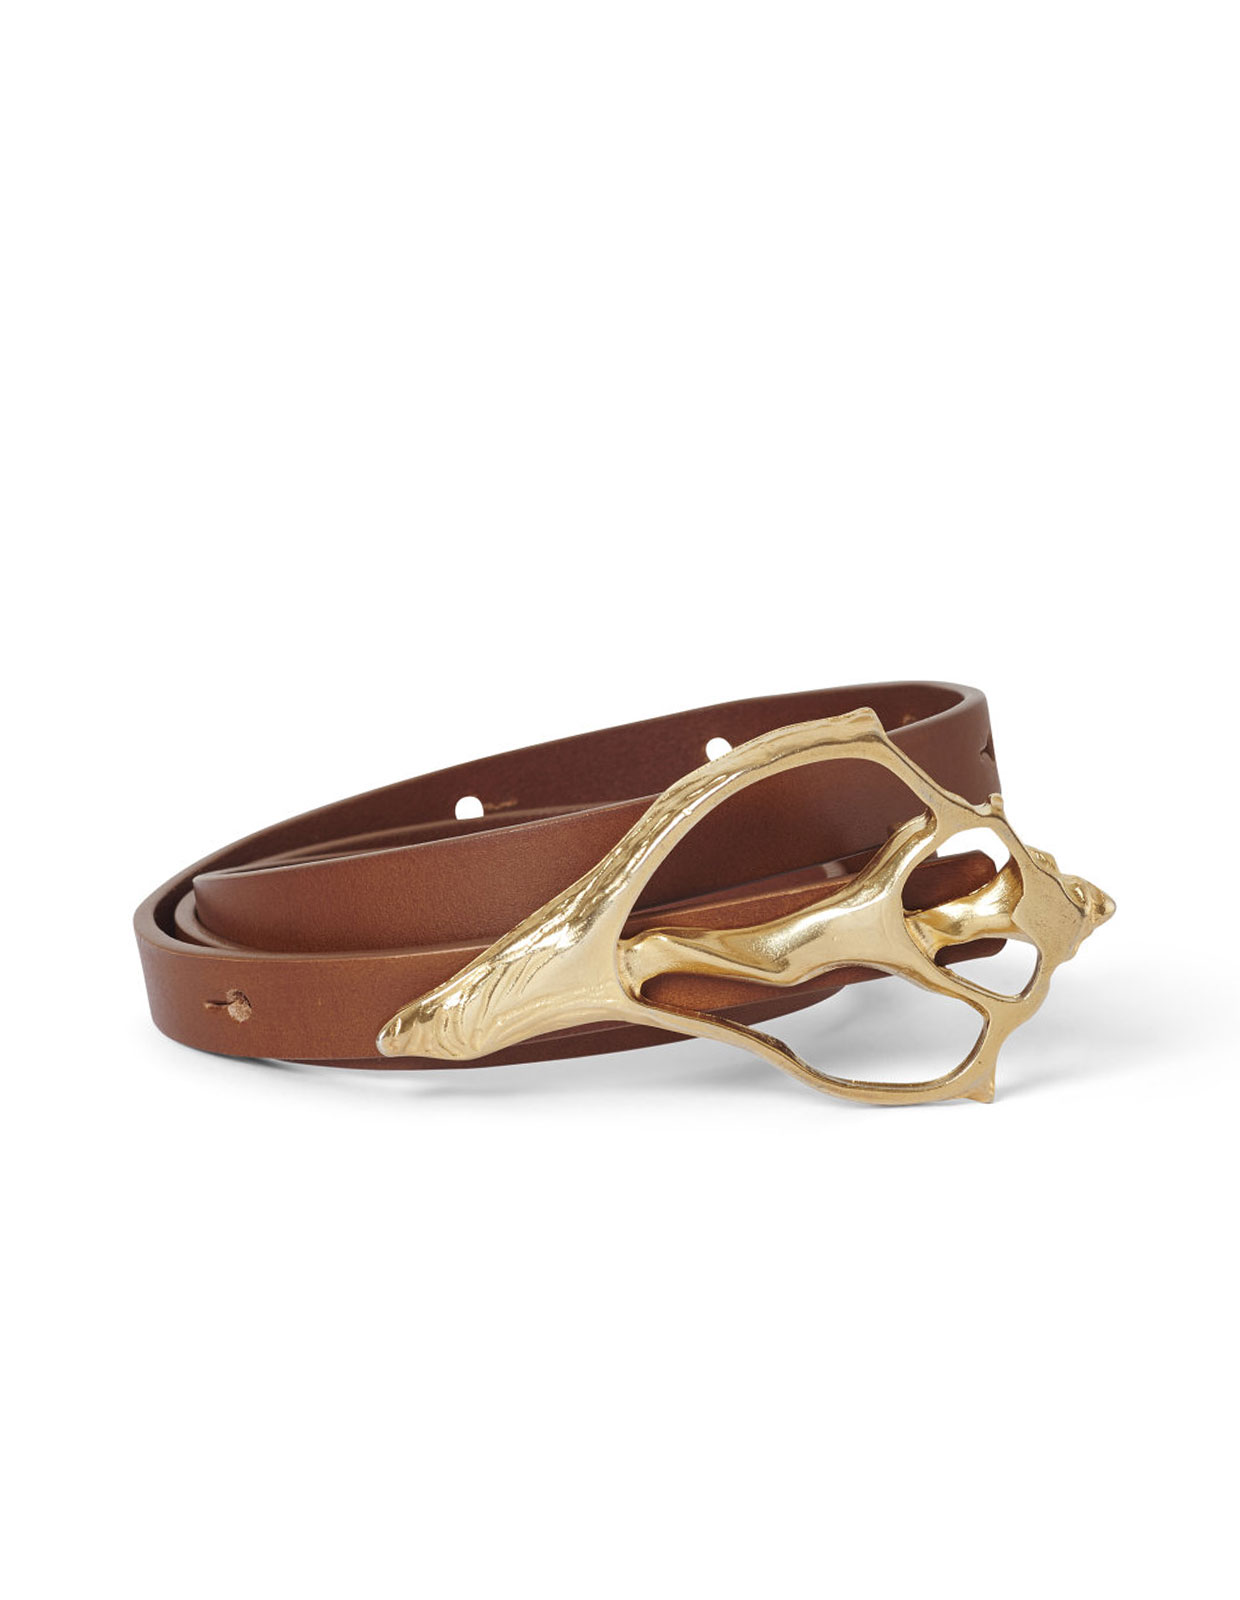 Shell Leather Belt Brown/Gold